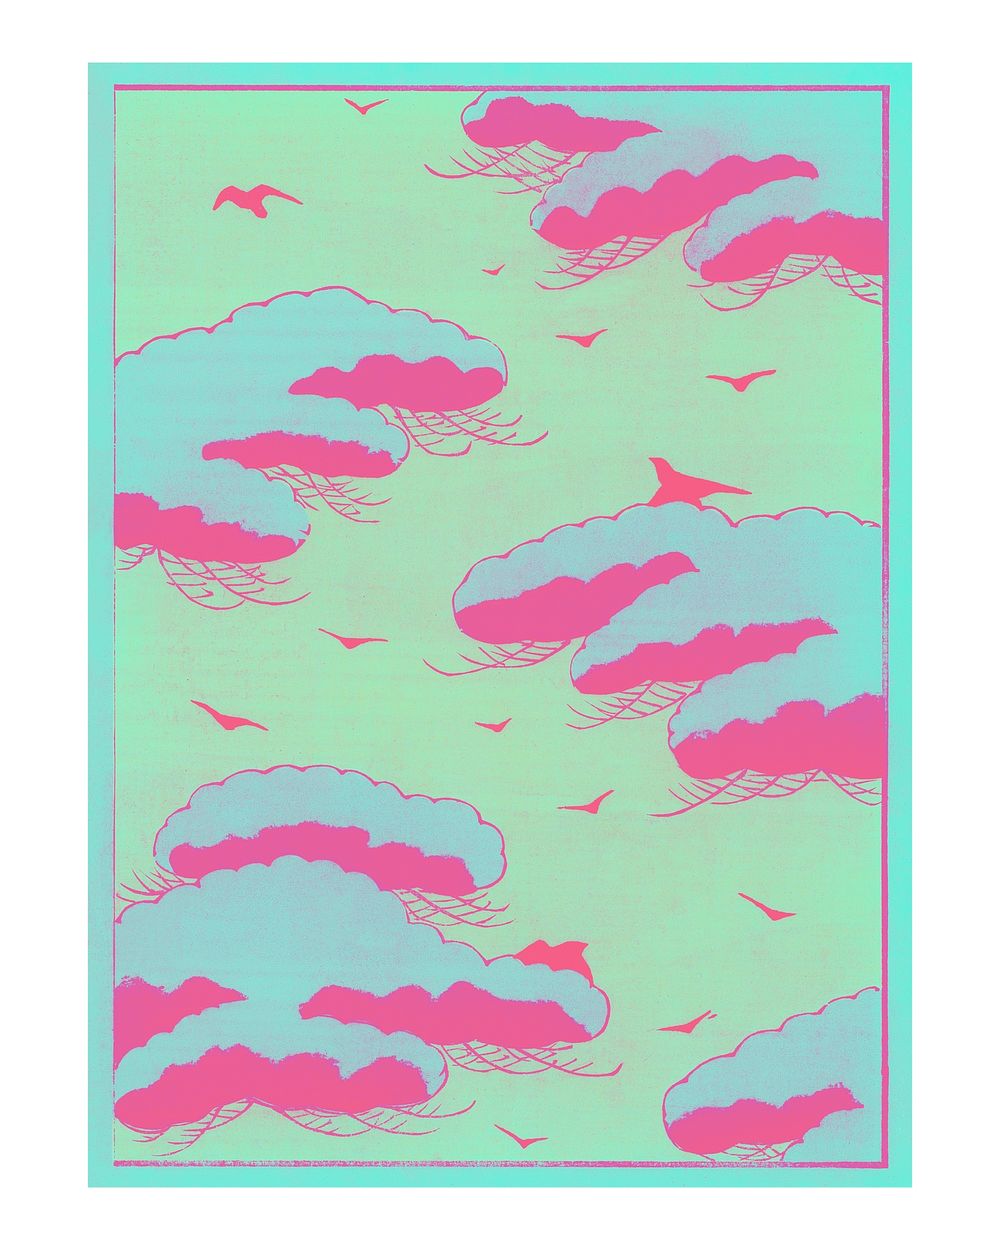 Pink and blue cloudy sky illustration wall art print and poster. Remix from original painting